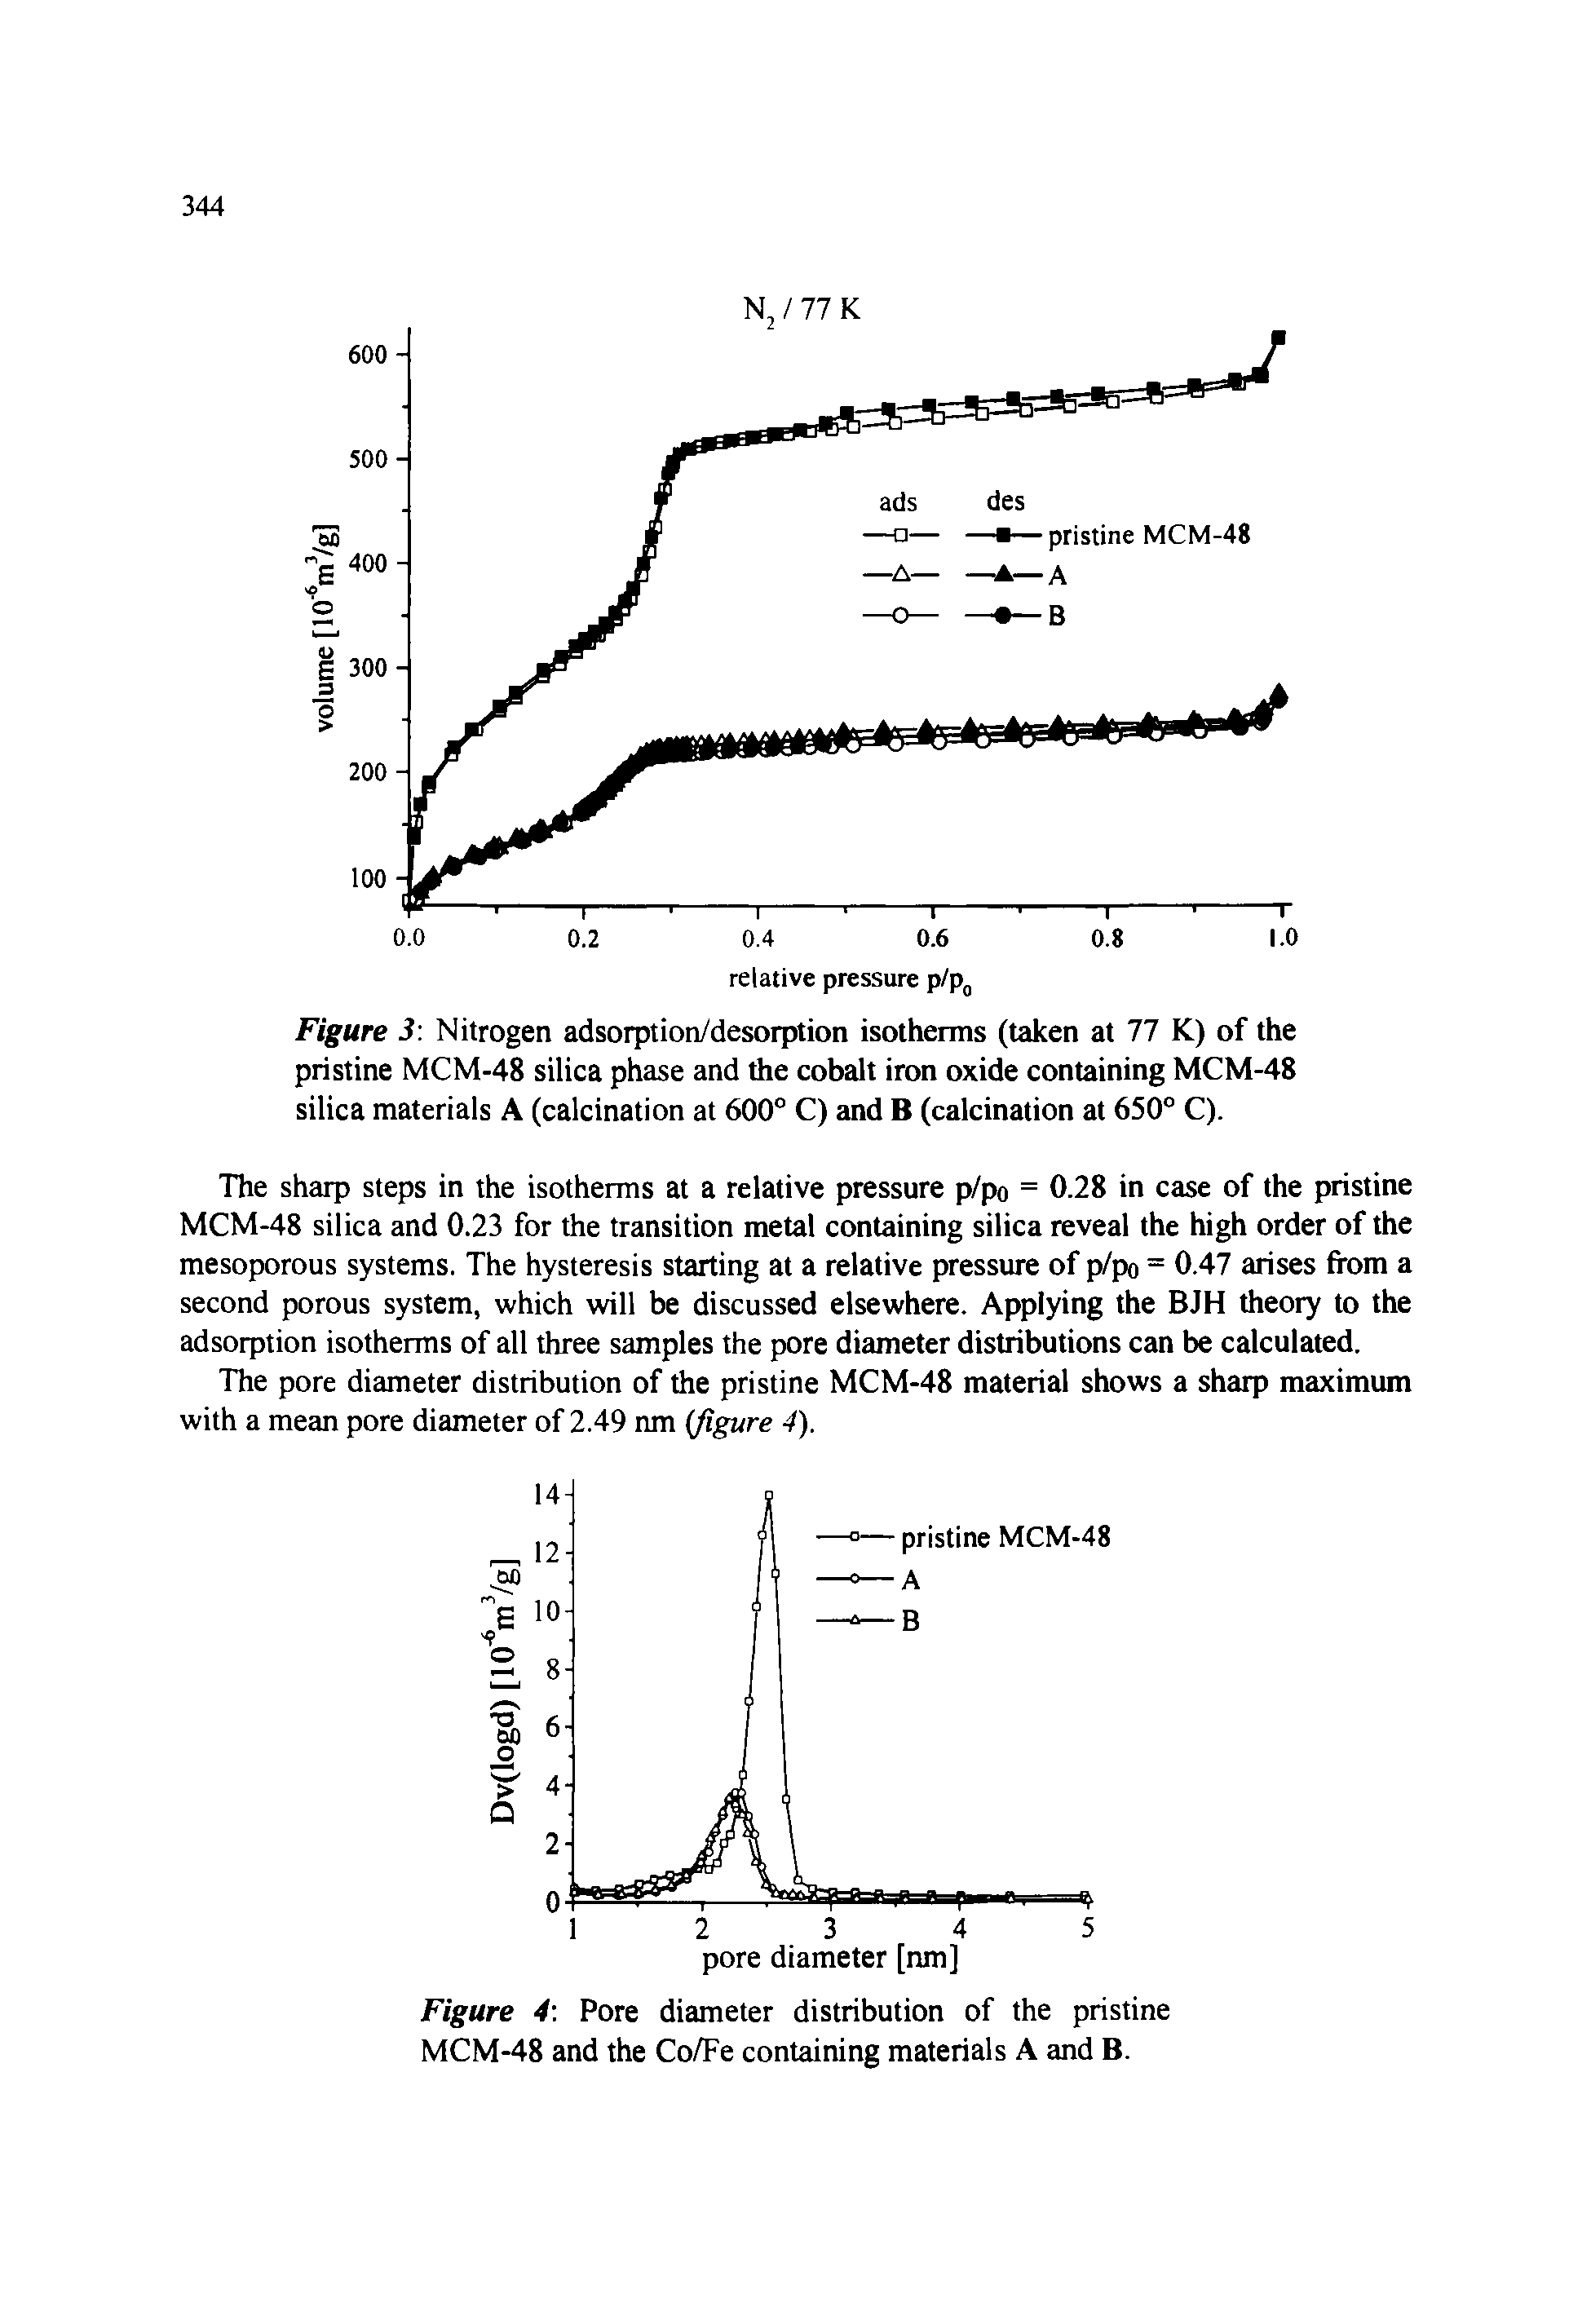 Figure 3 Nitrogen adsorption/desorption isotherms (taken at 77 K) of the pristine MCM-48 silica phase and the cobalt iron oxide containing MCM-48 silica materials A (calcination at 600° C) and B (calcination at 650° C).